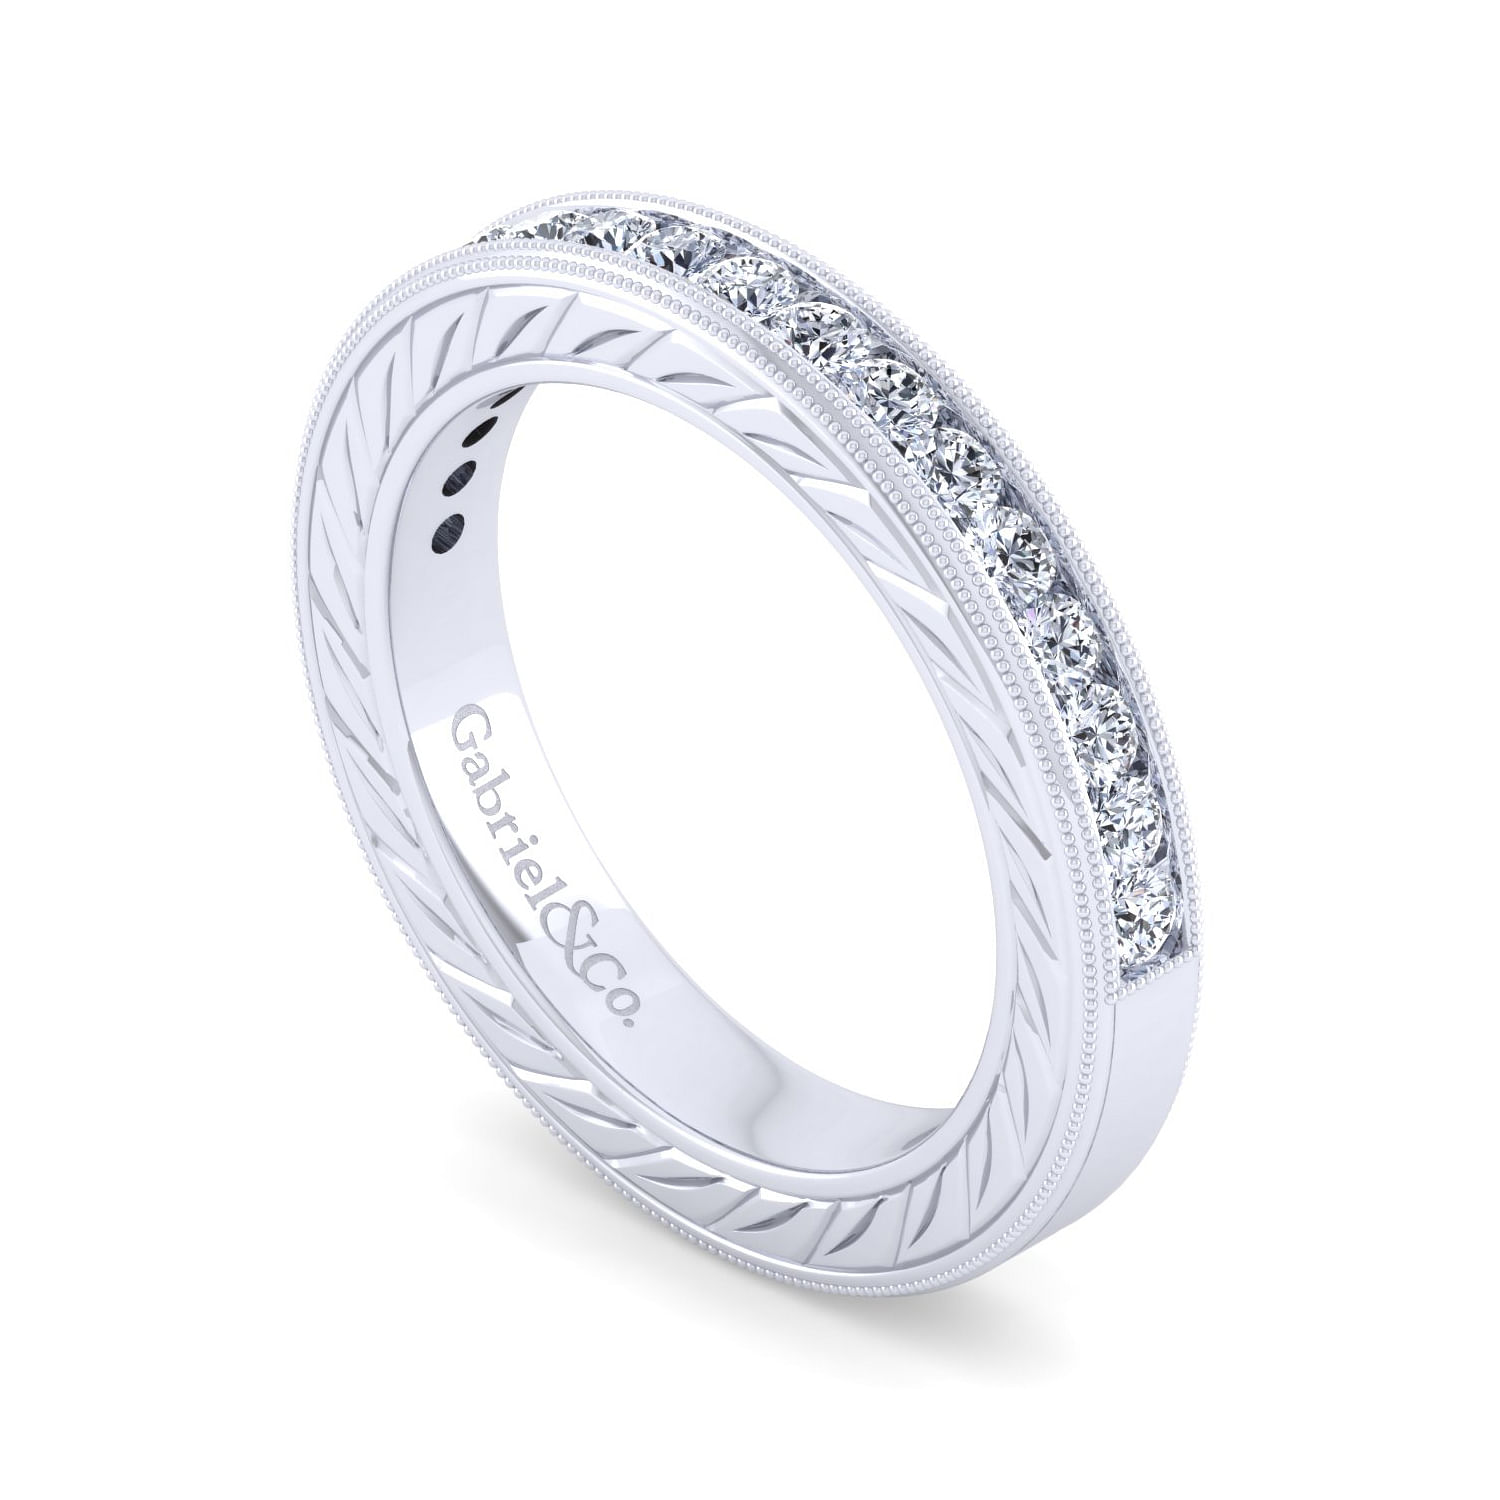 14K White Gold Channel Set Diamond Anniversary Band with Milgrain and Engraving